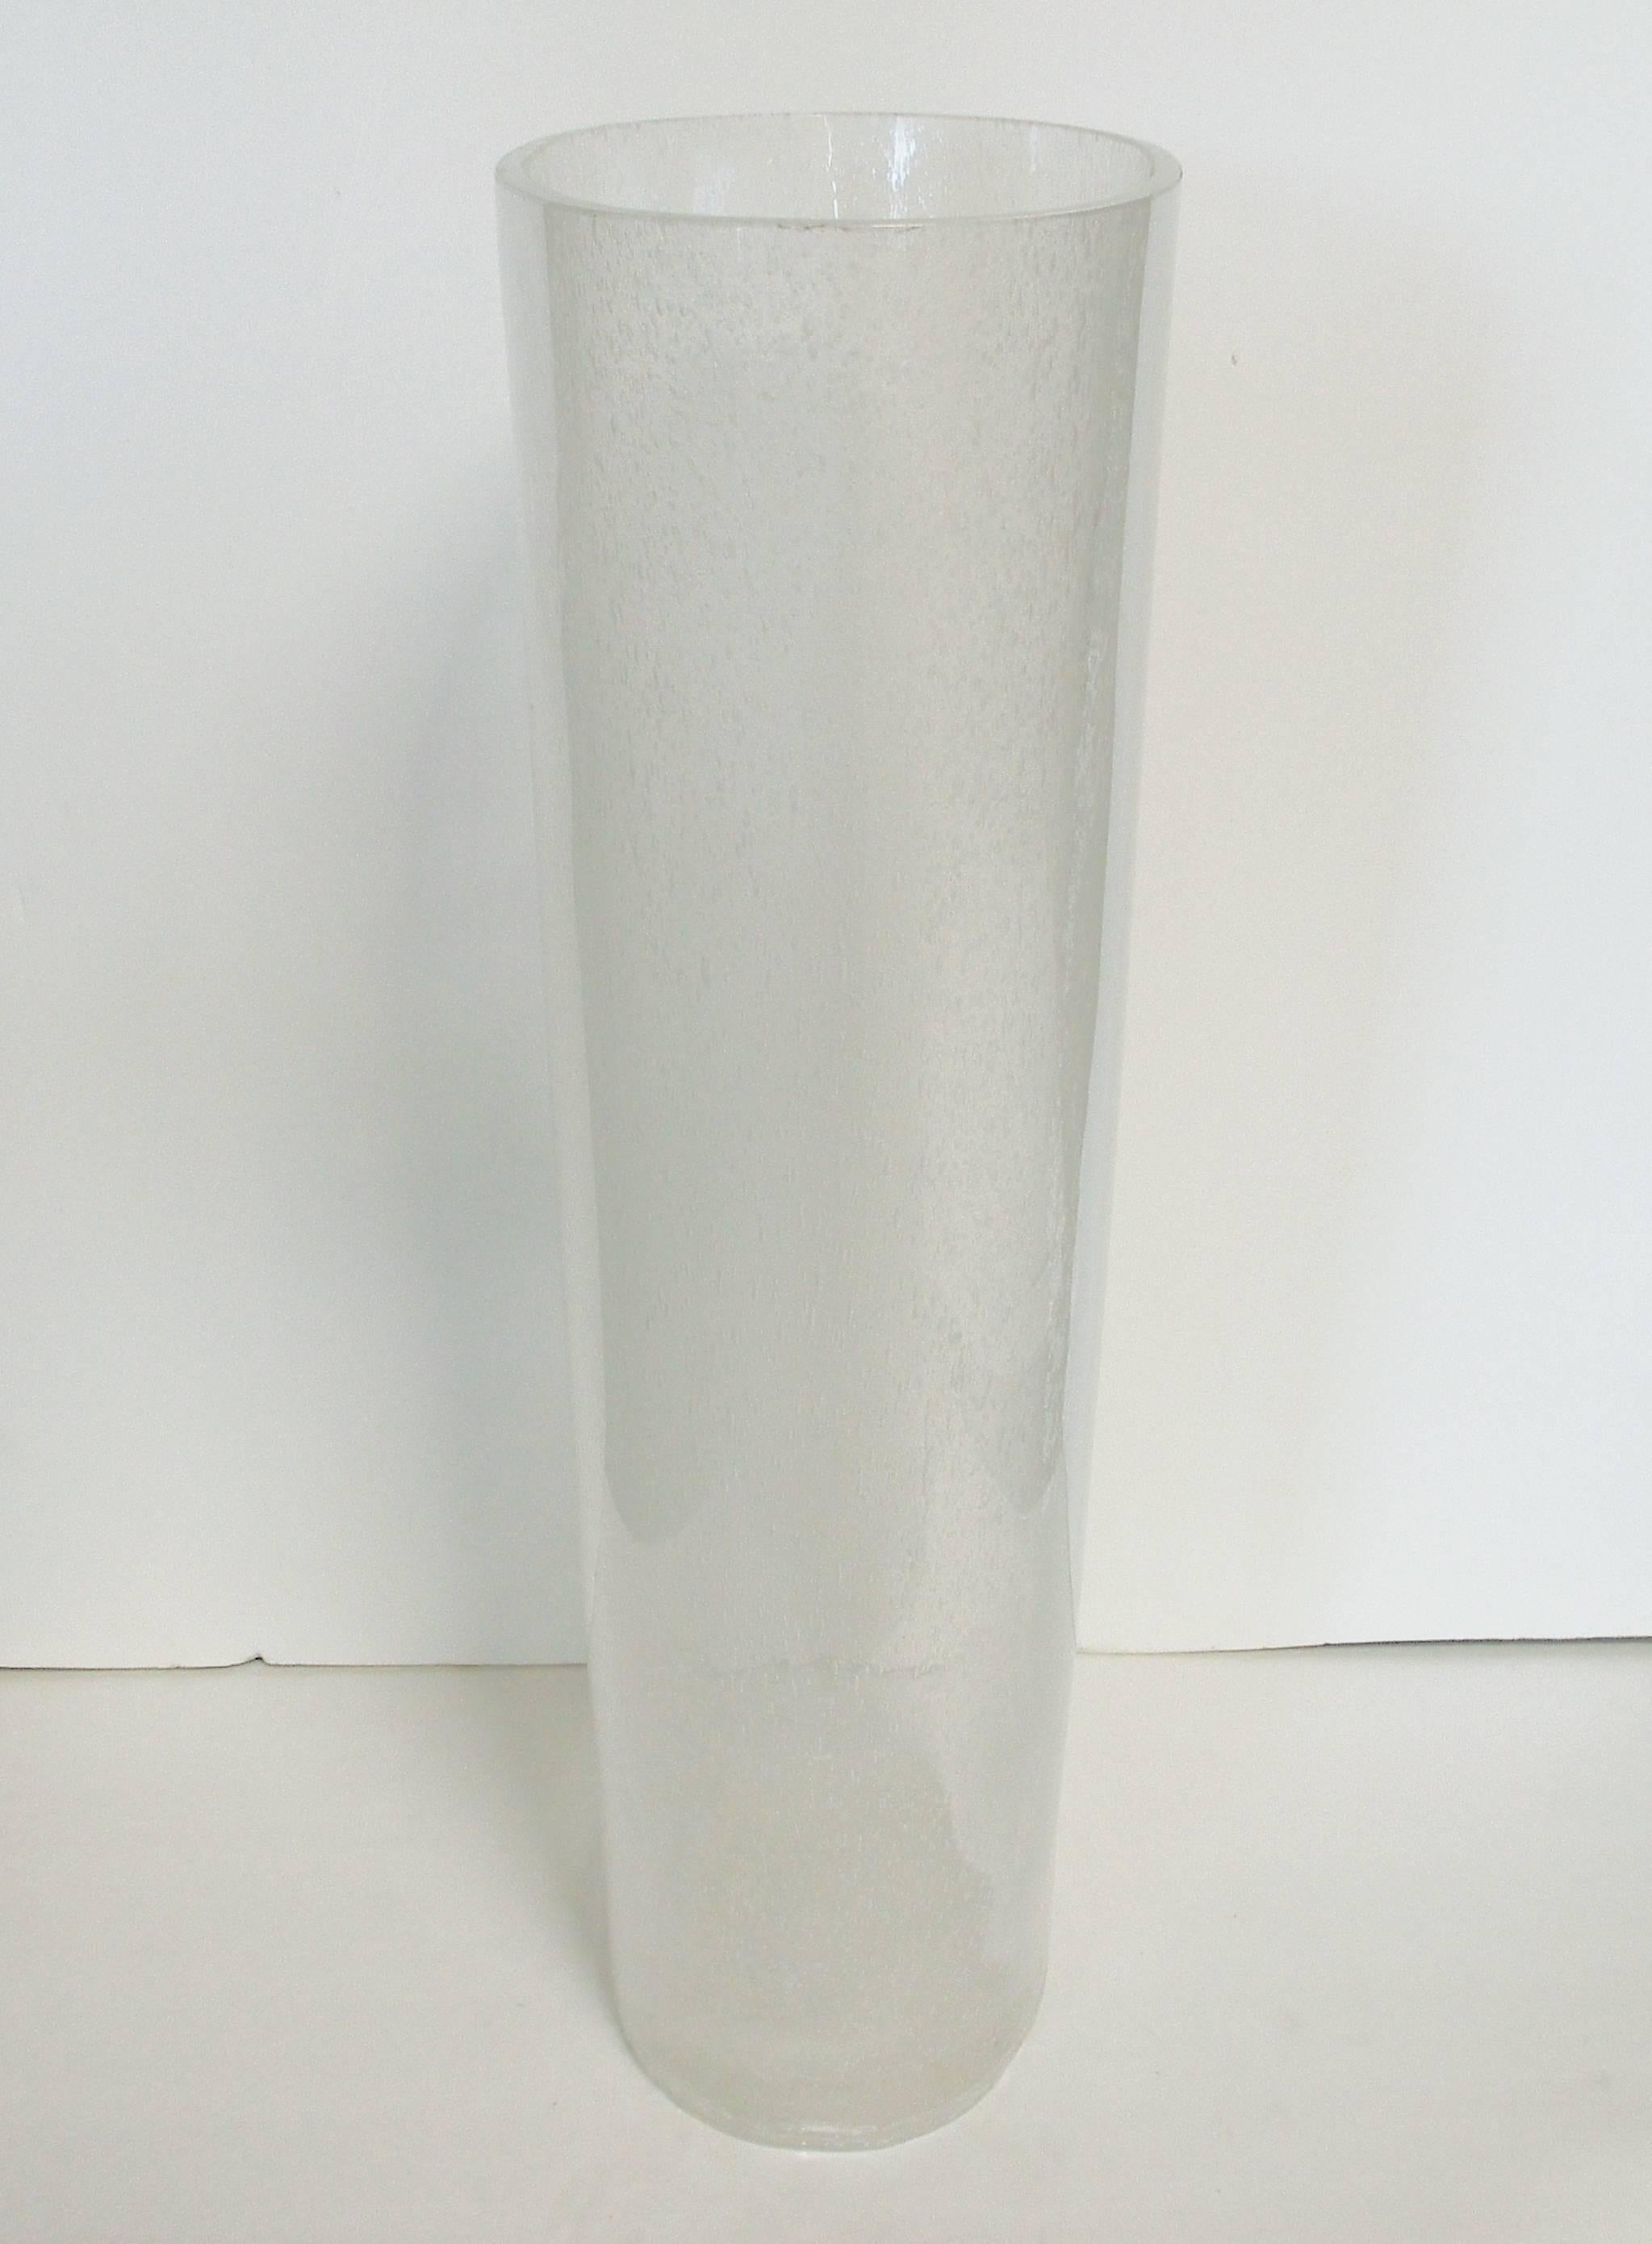 Vintage Italian oversized clear Murano glass vase hand blown in Bollicine technique, bubbles within the glass, made in Italy in the 1960s
Measures: Height 24.5 inches, depth 7.5 inches, width 11.5 inches
2 in stock in Palm Springs currently ON 40%